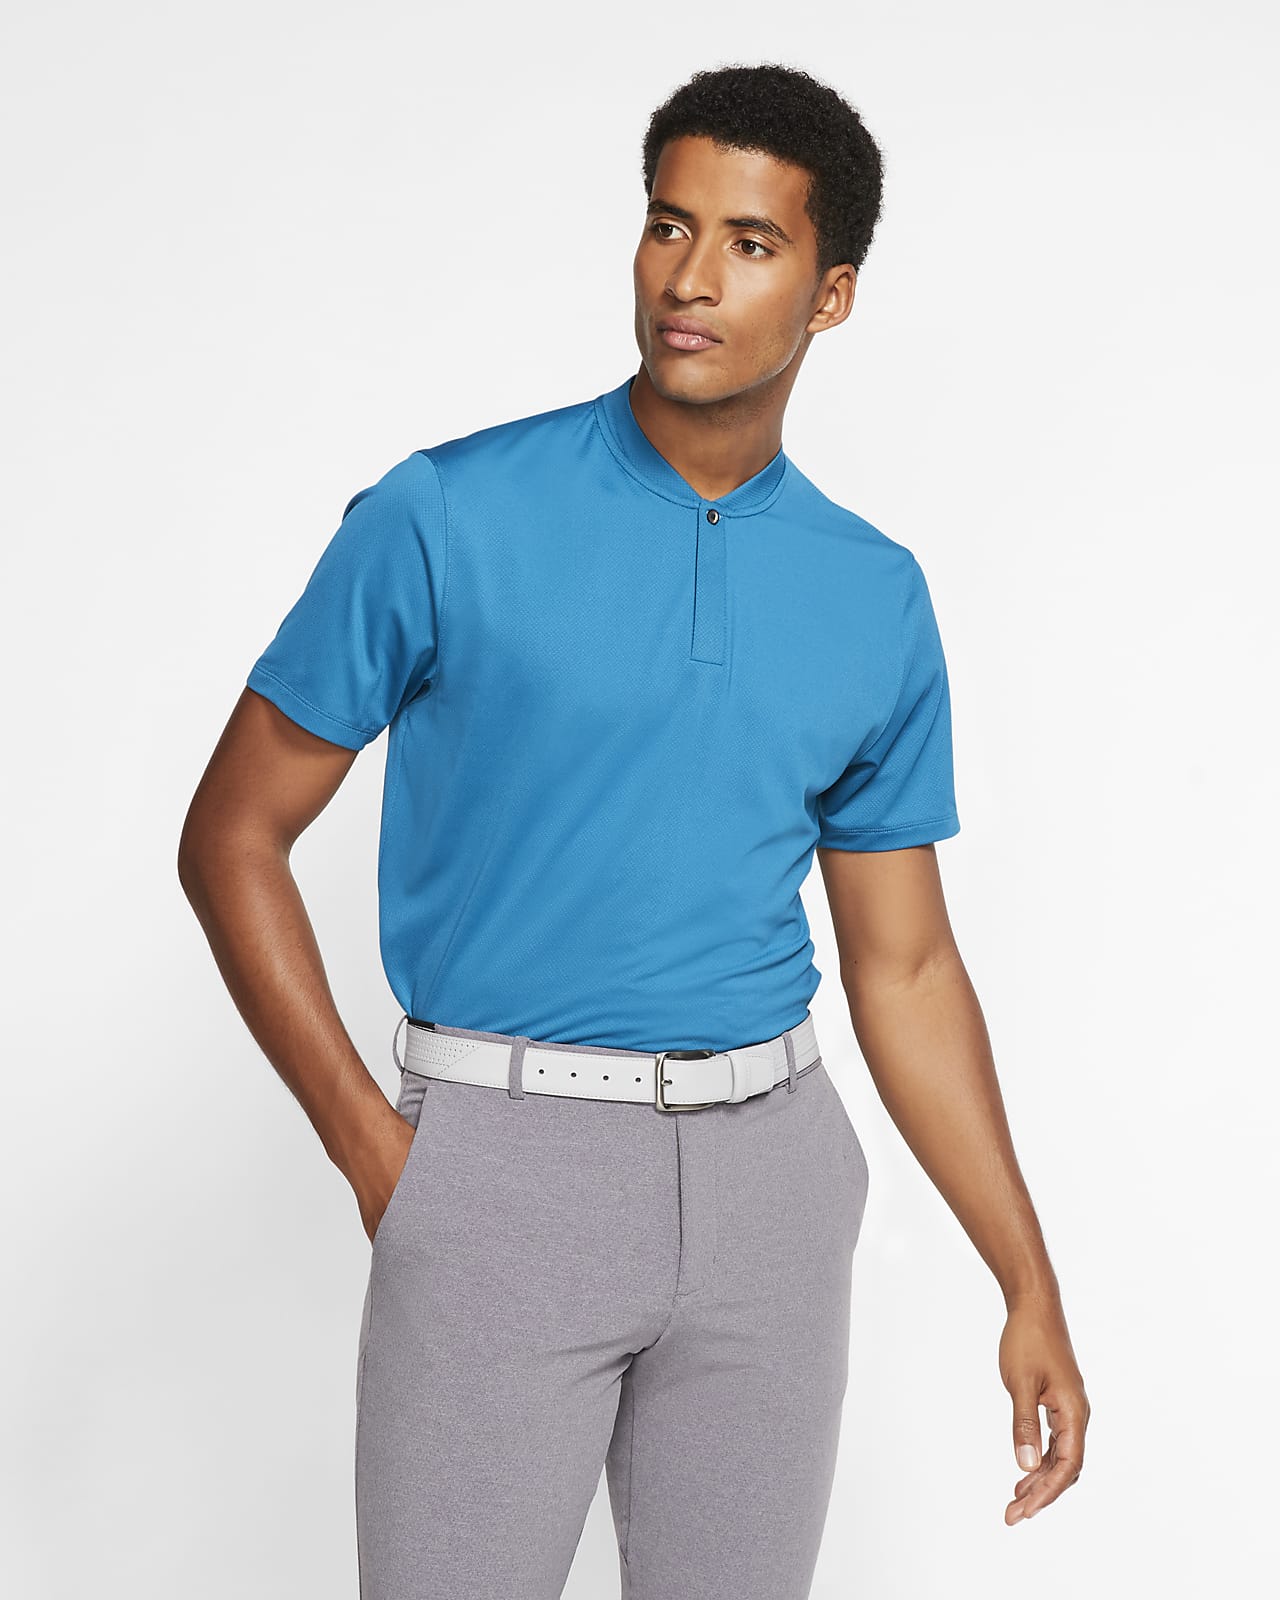 tiger woods golf shirts clearance